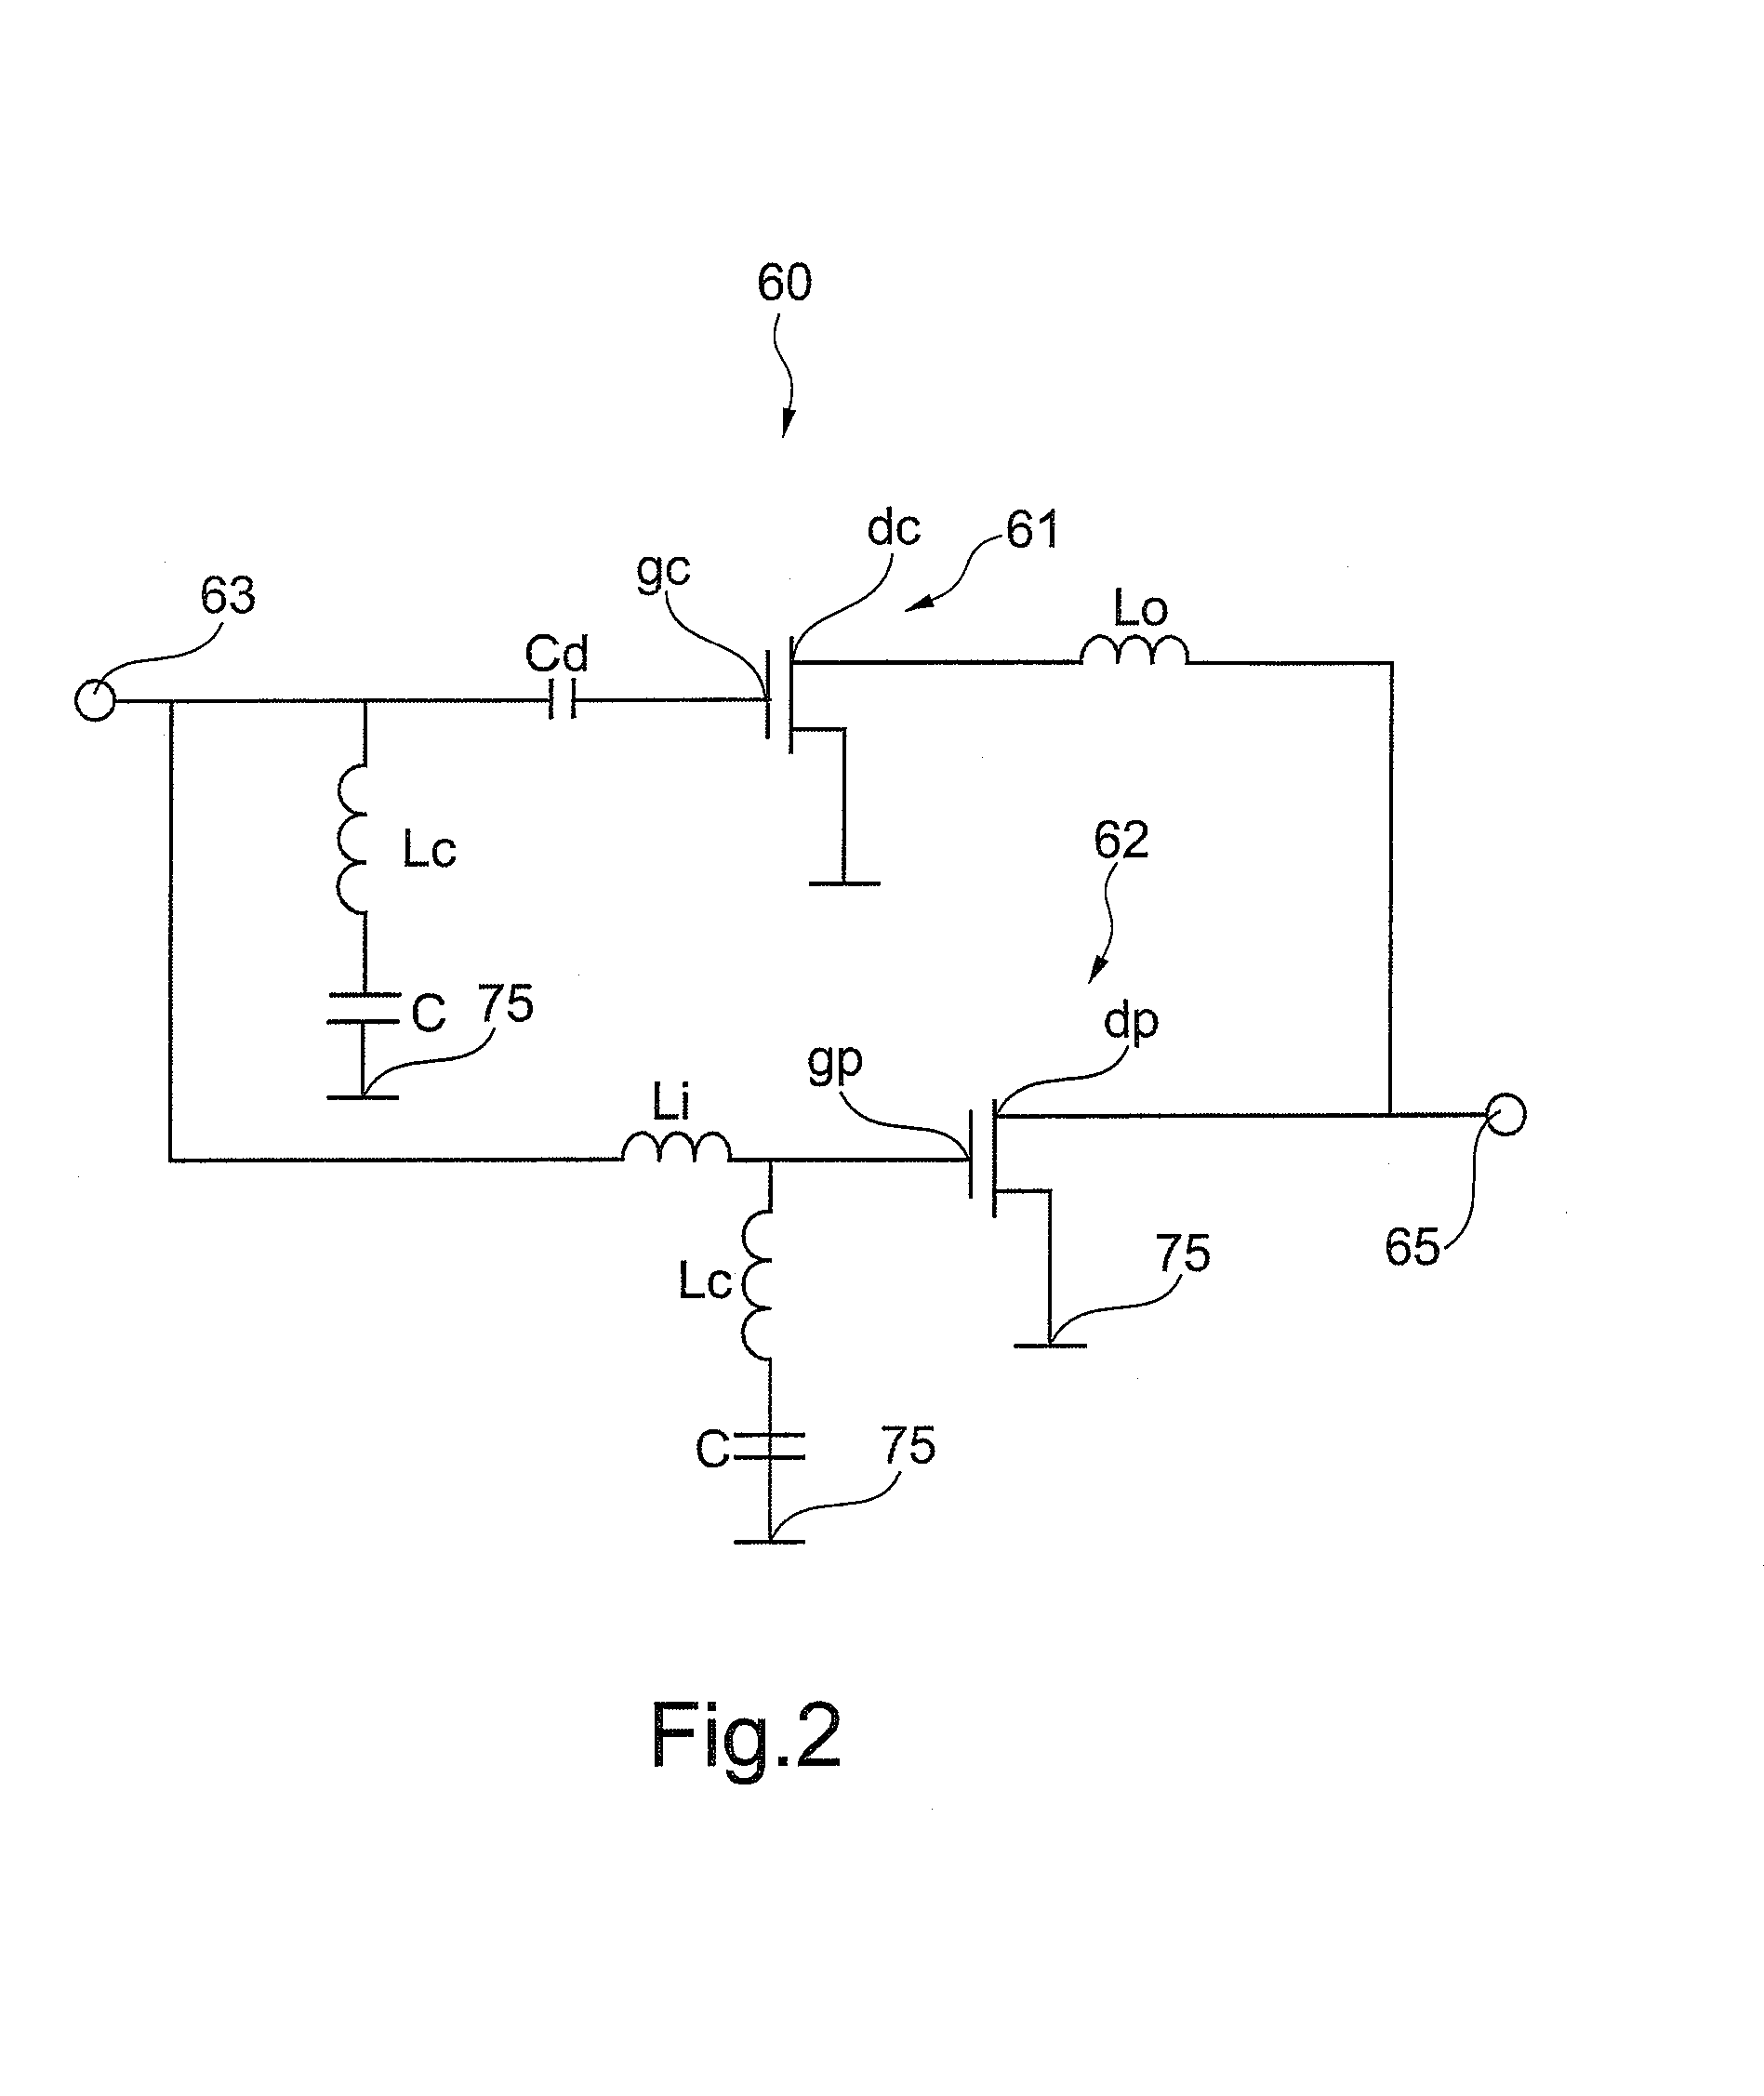 Doherty amplifier with composed transfer characteristic having multiple peak amplifiers